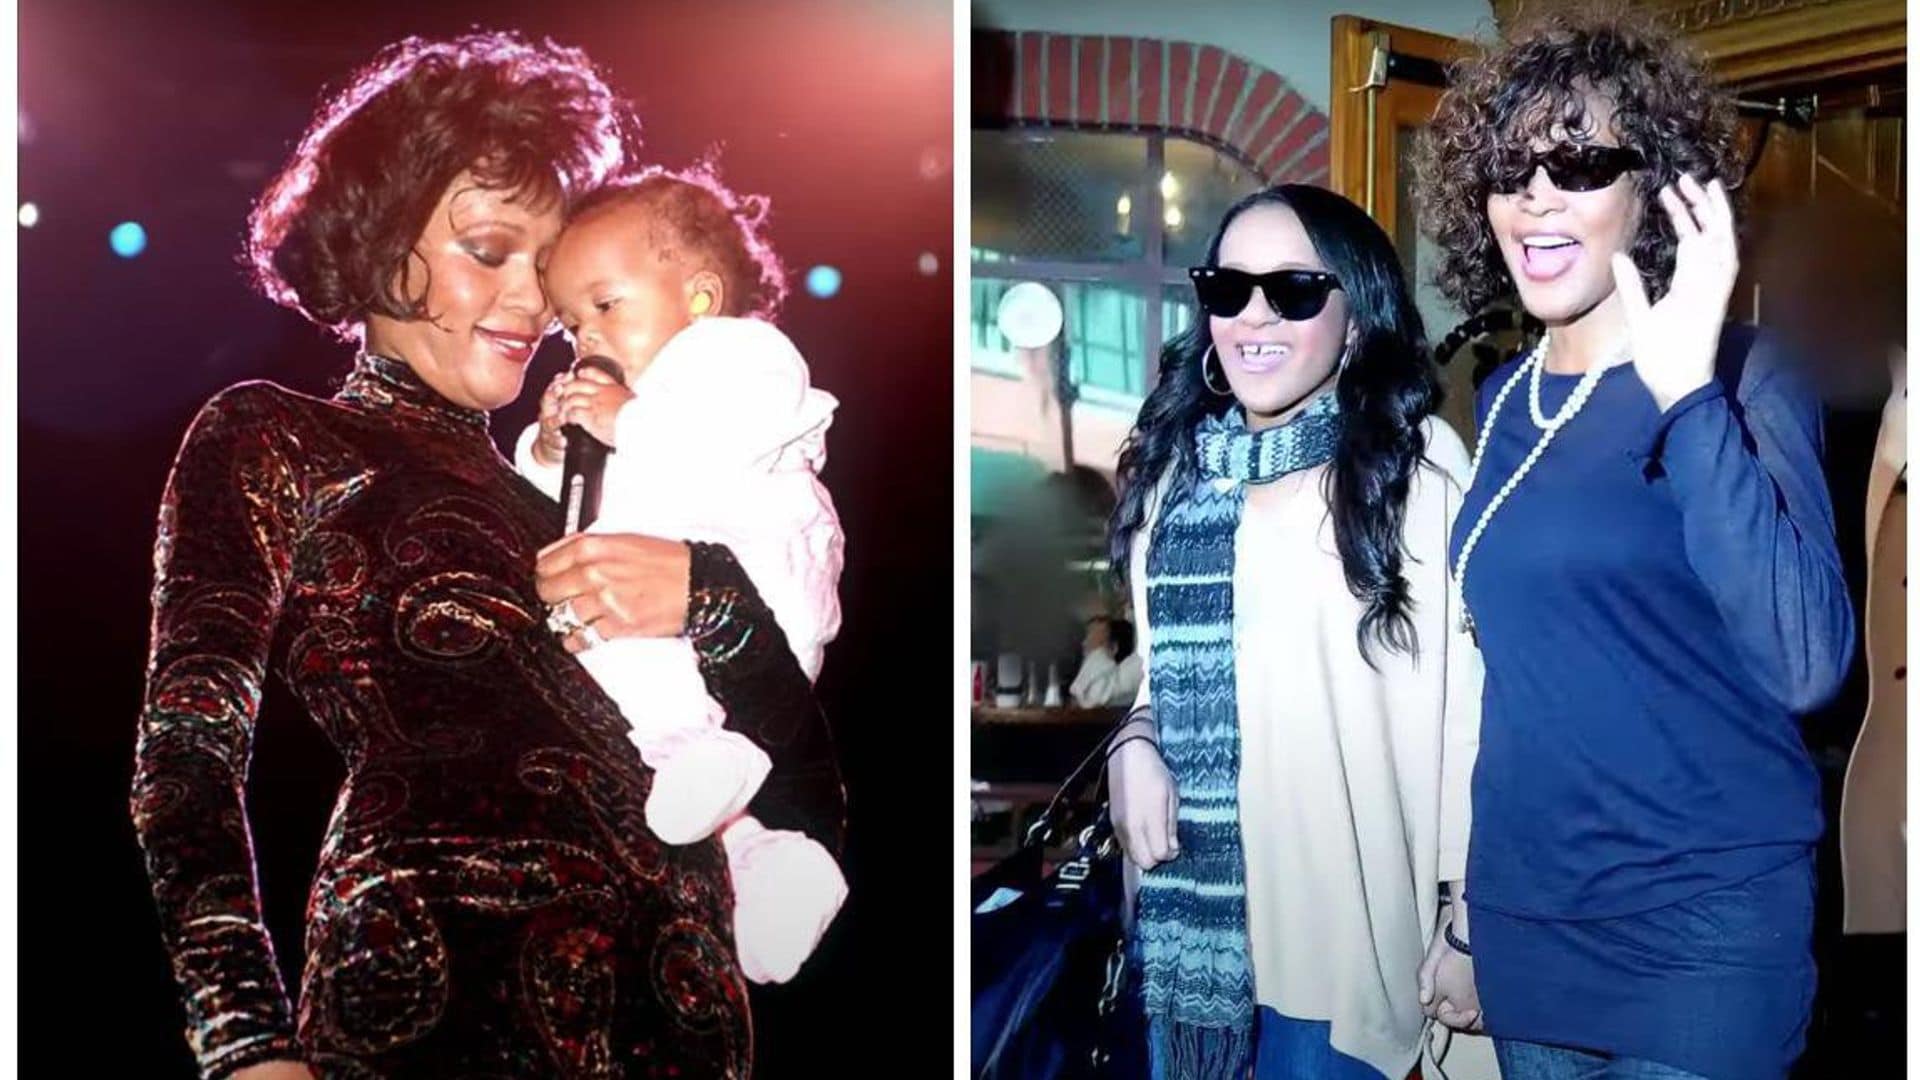 Whitney Houston and Bobbi Kristina as a baby and an adult